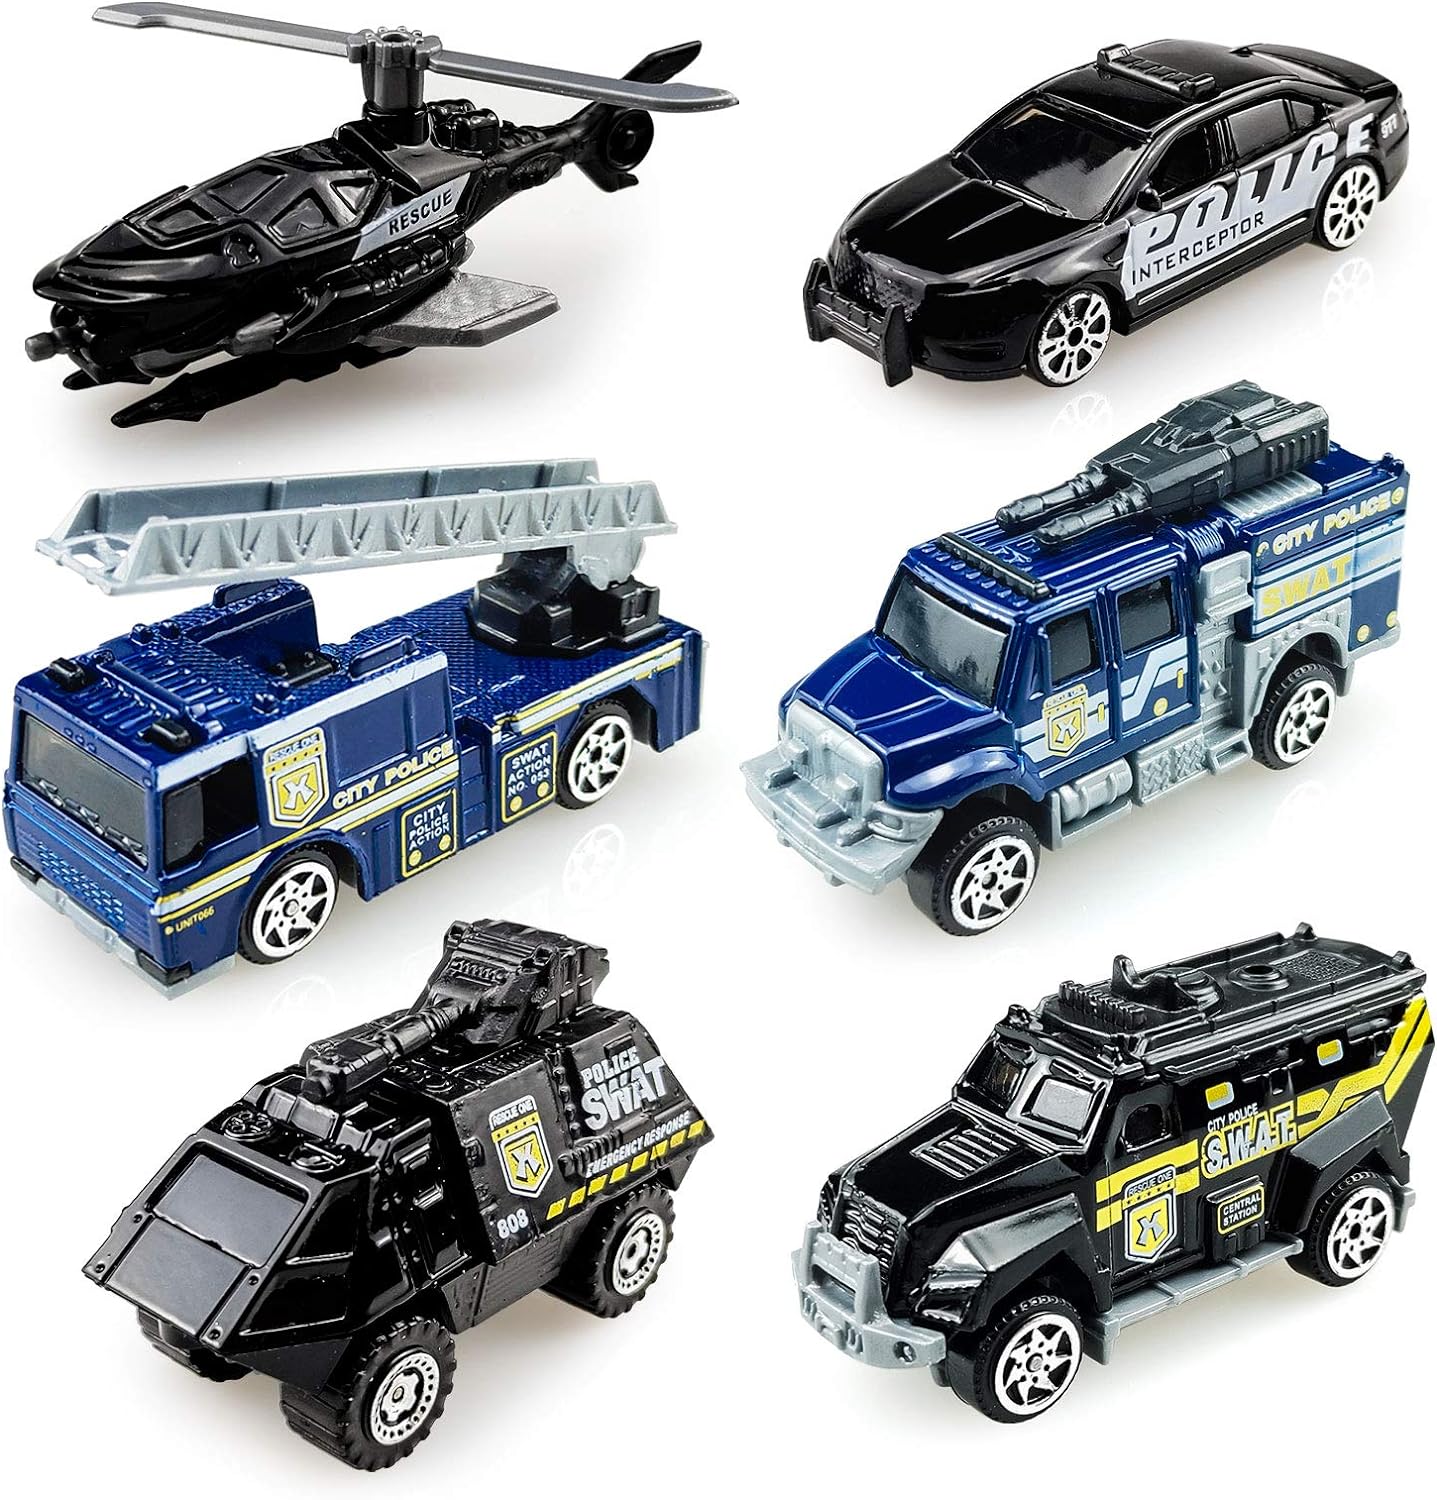 diecast police car toy set review